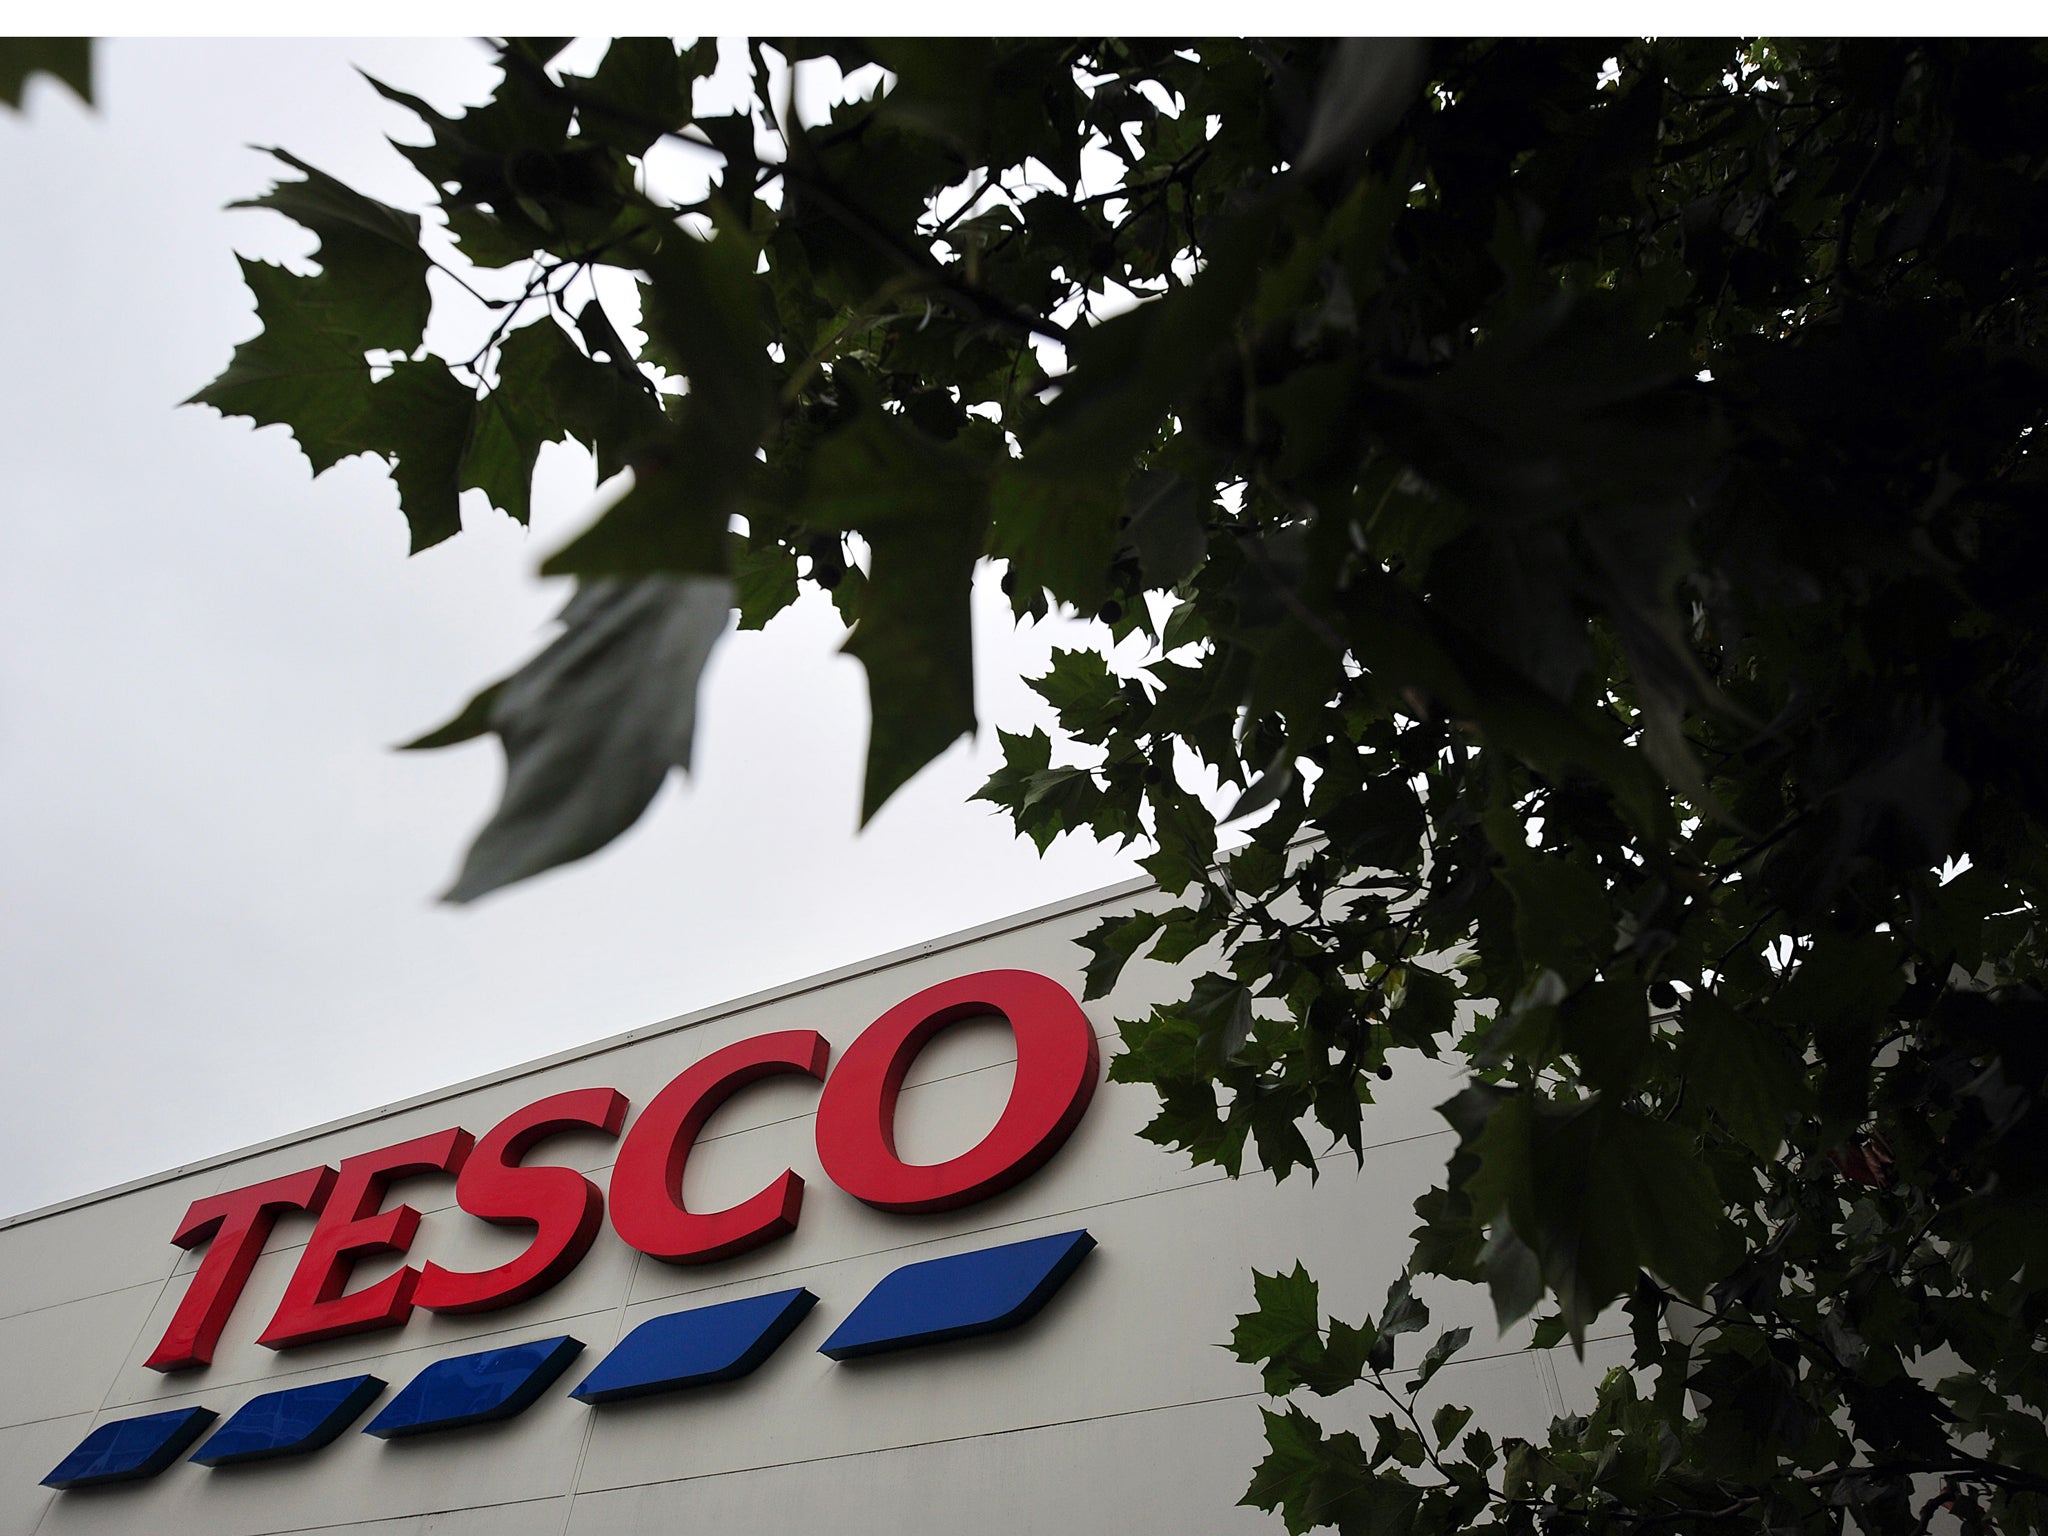 Tesco CEO Philip Clarke need to convince investors things are moving in the right direction